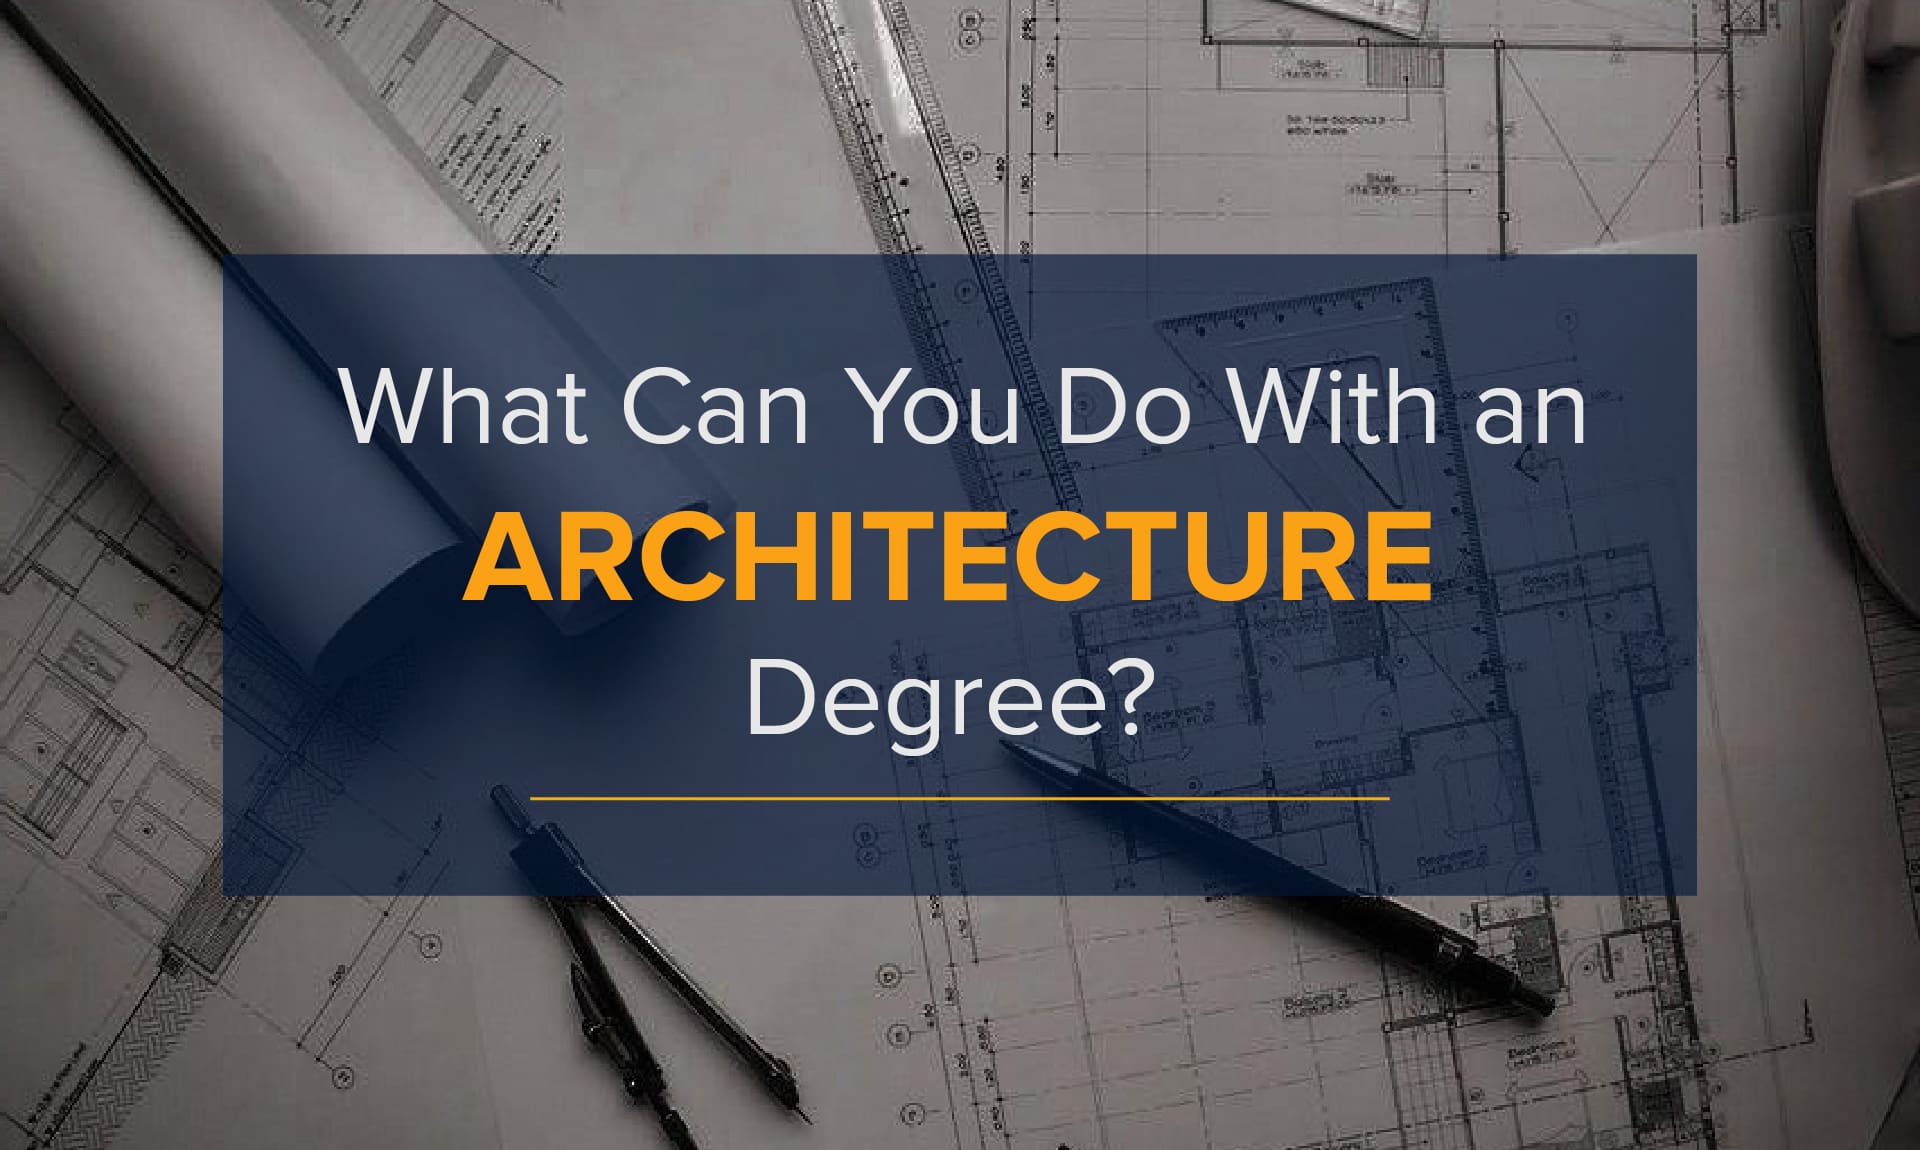 What Can You Do With an Architecture Degree?